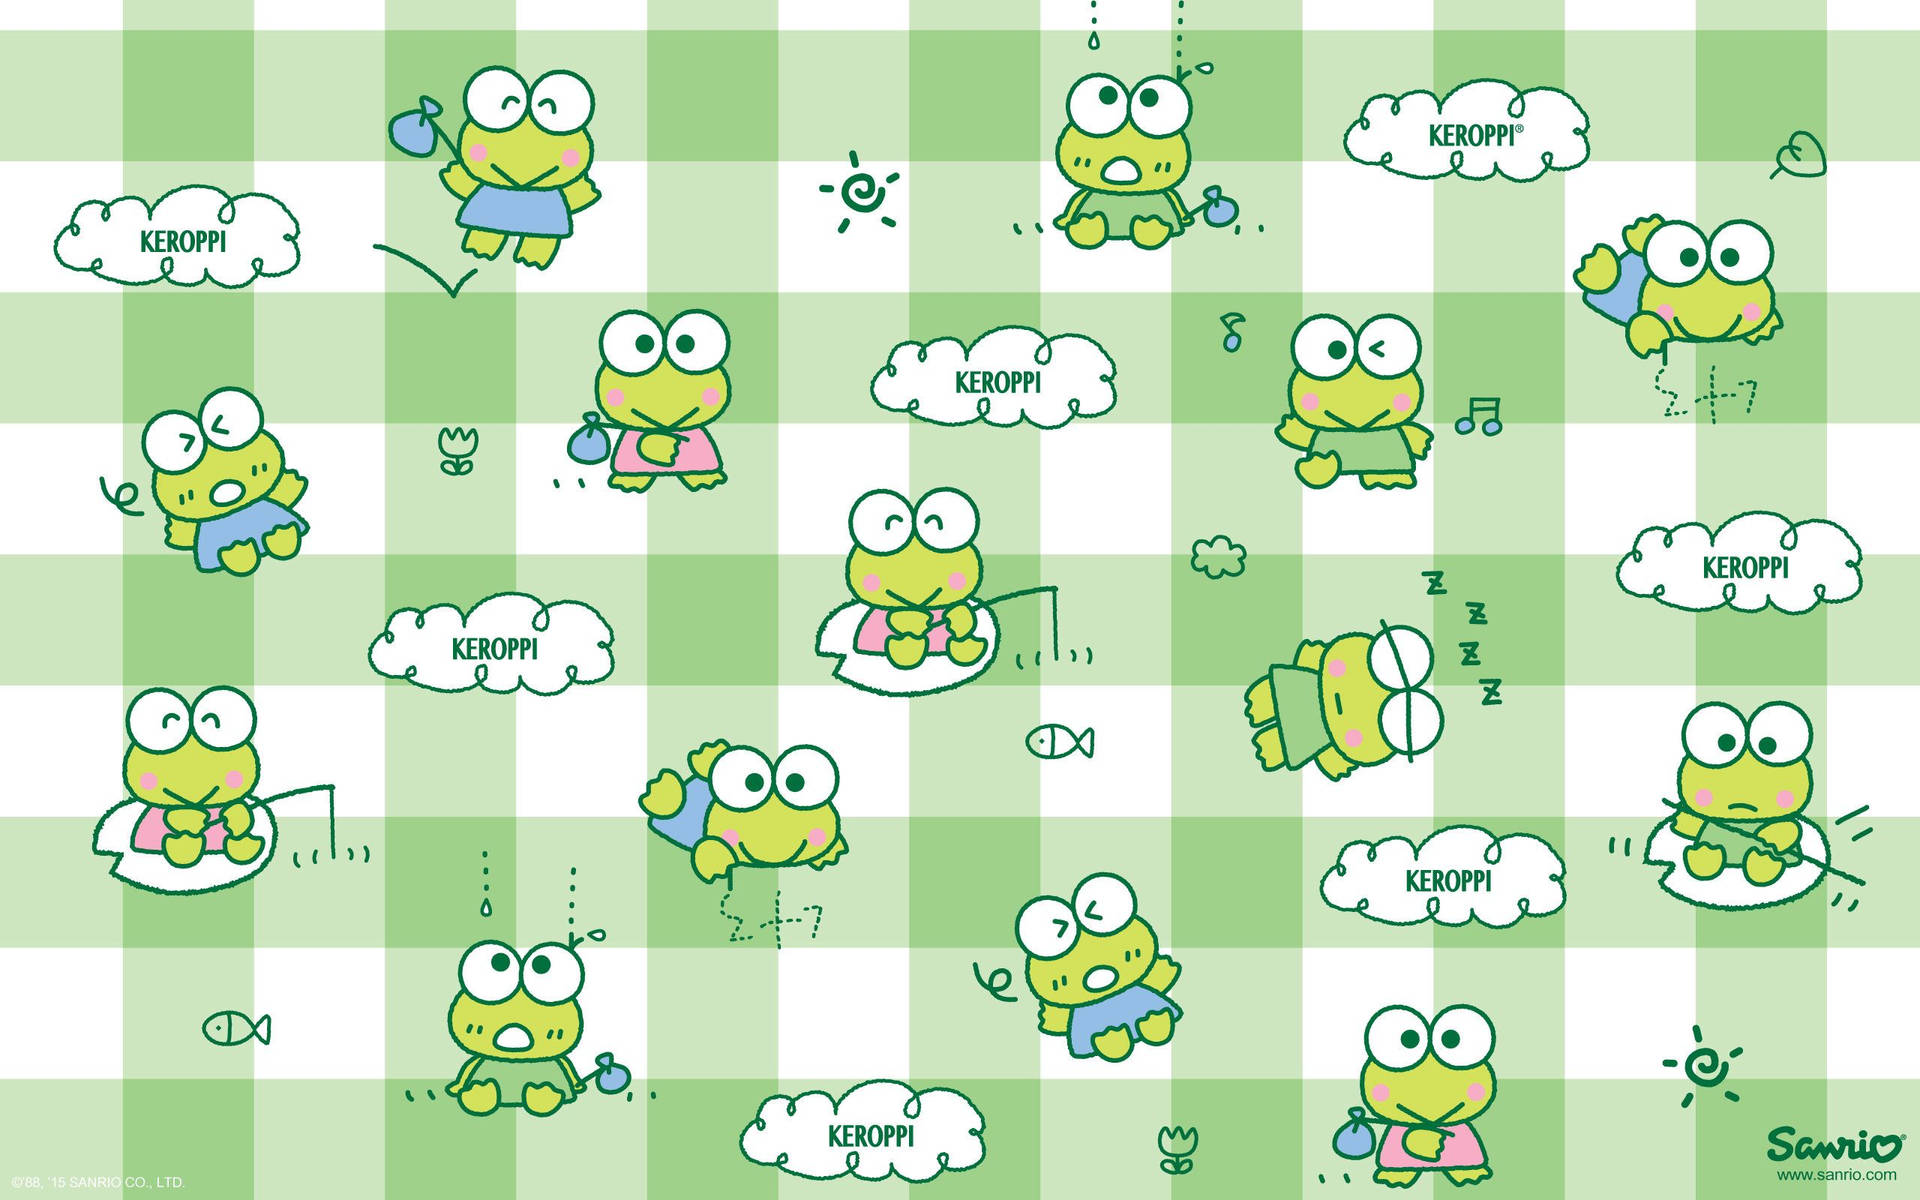 Enjoying an afternoon of relaxation with Keroppi. Wallpaper